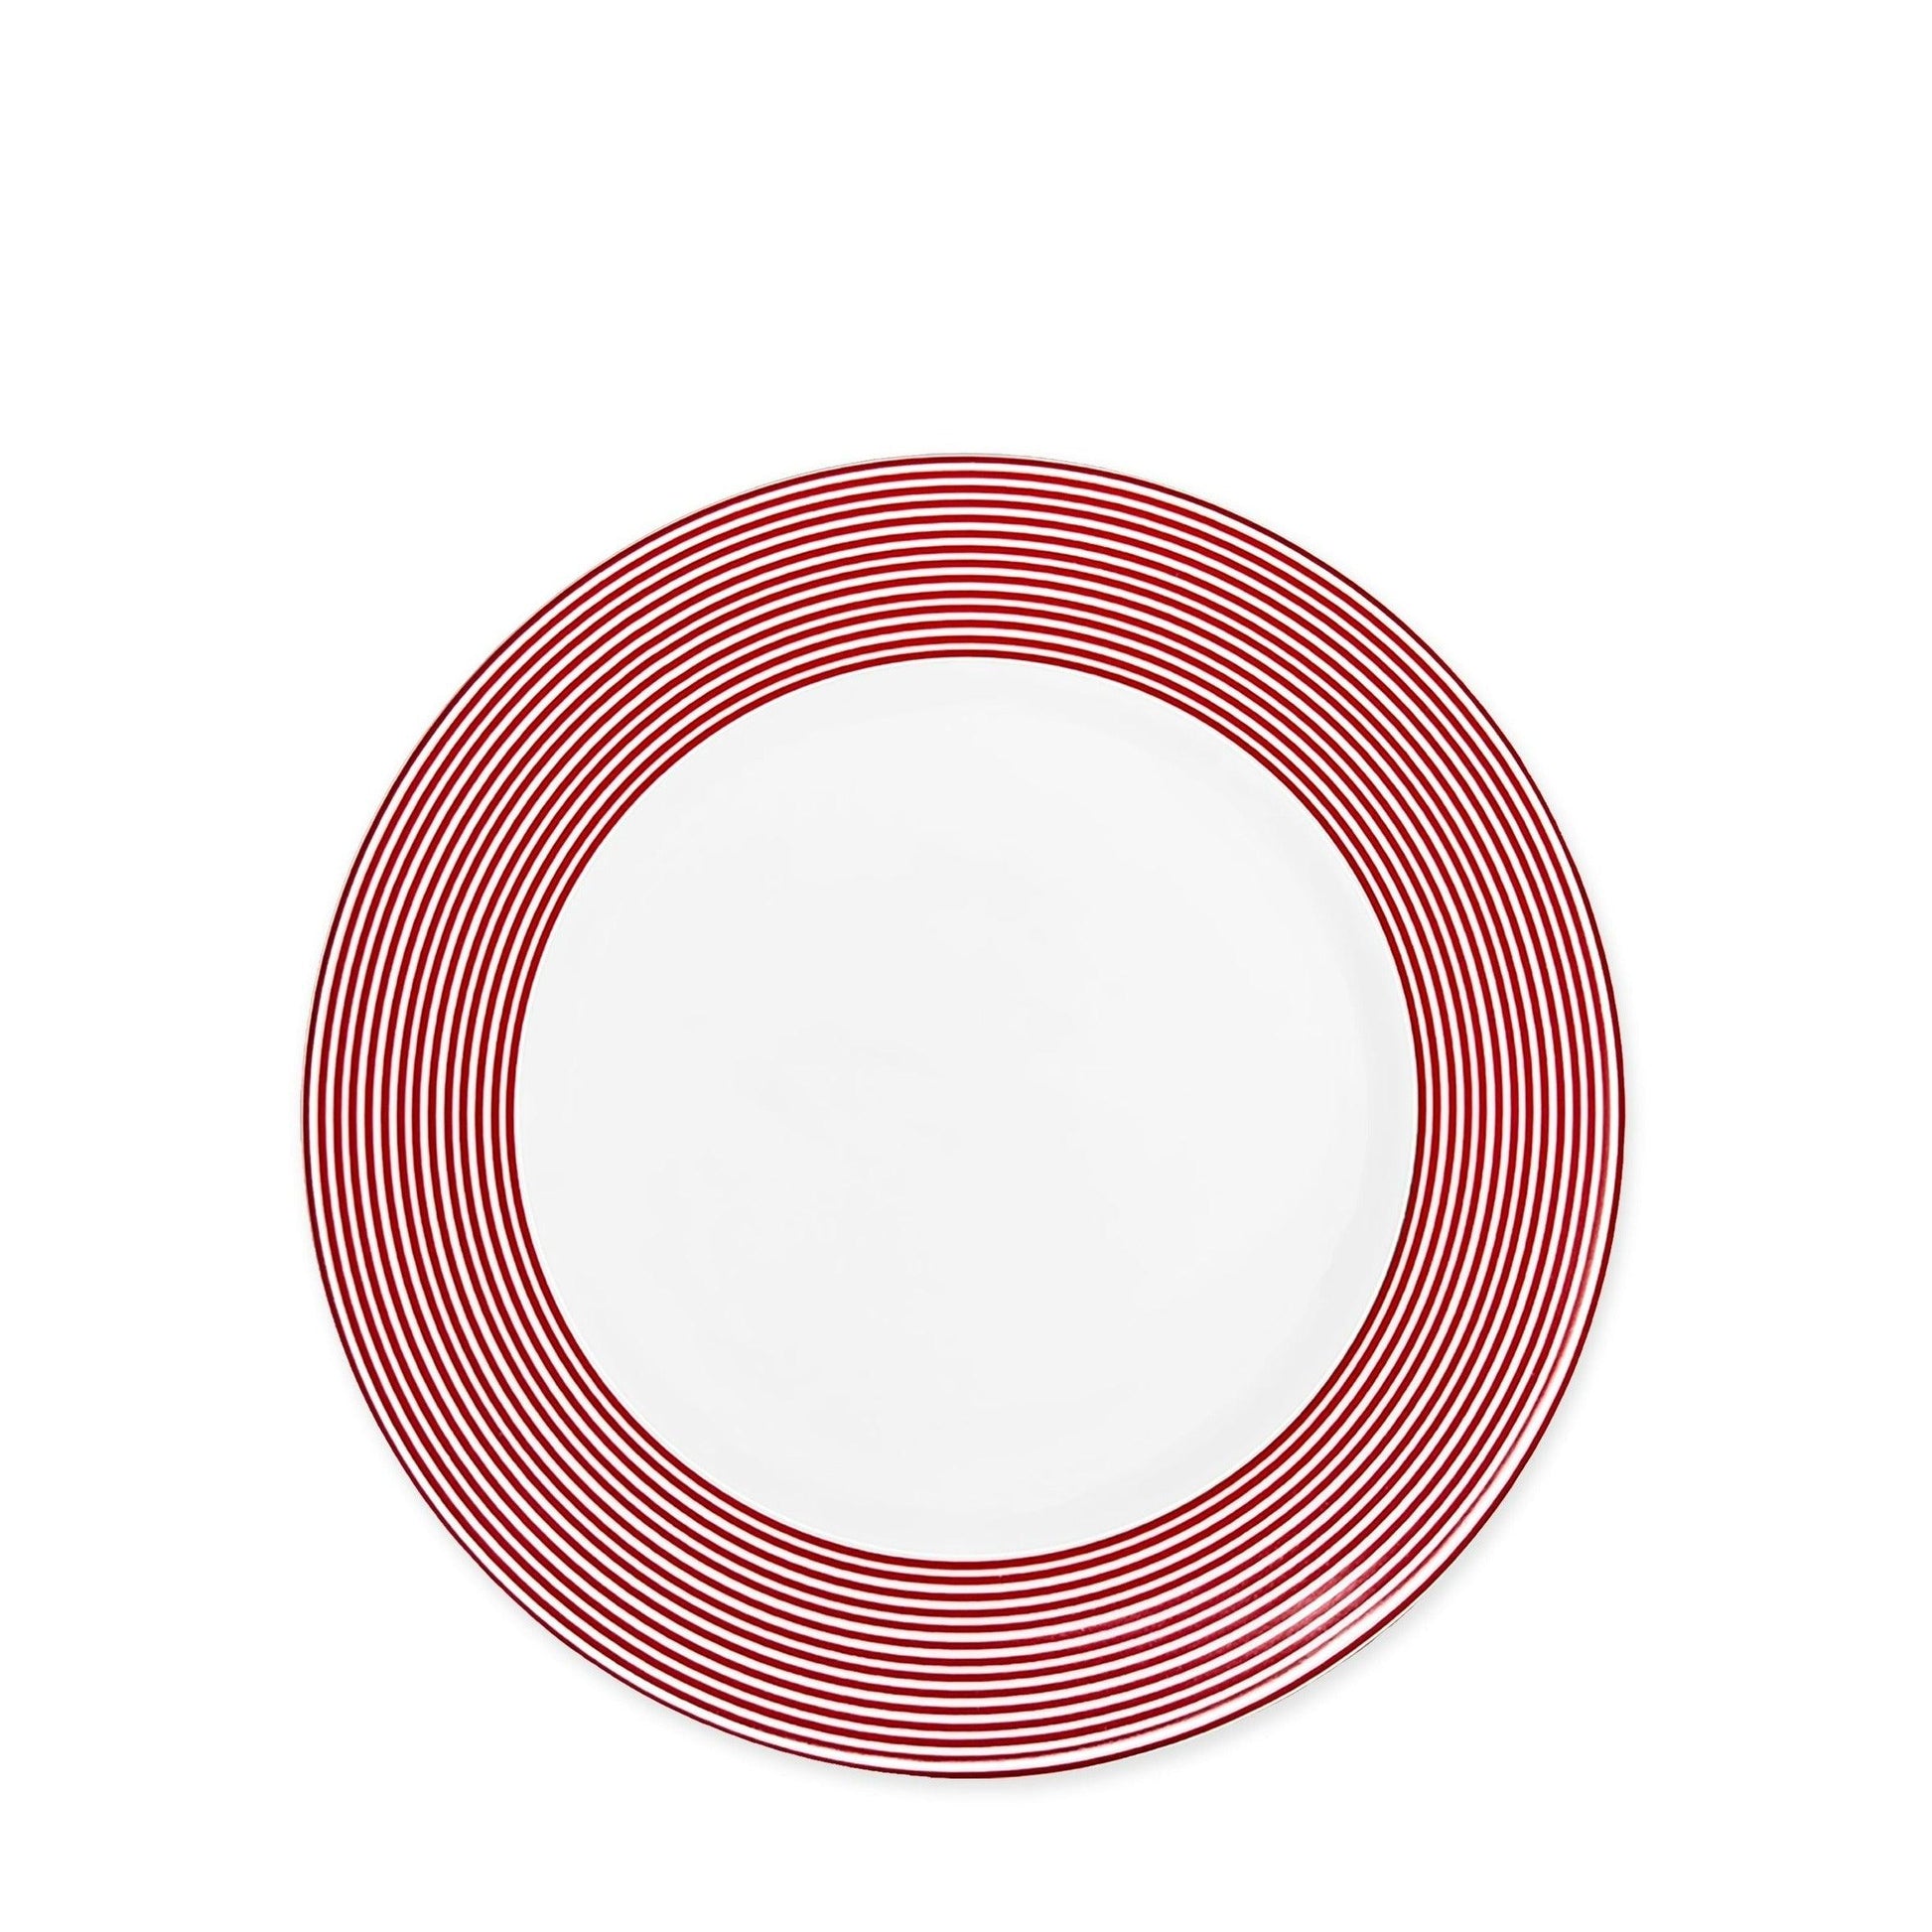 a red and white plate on a white background